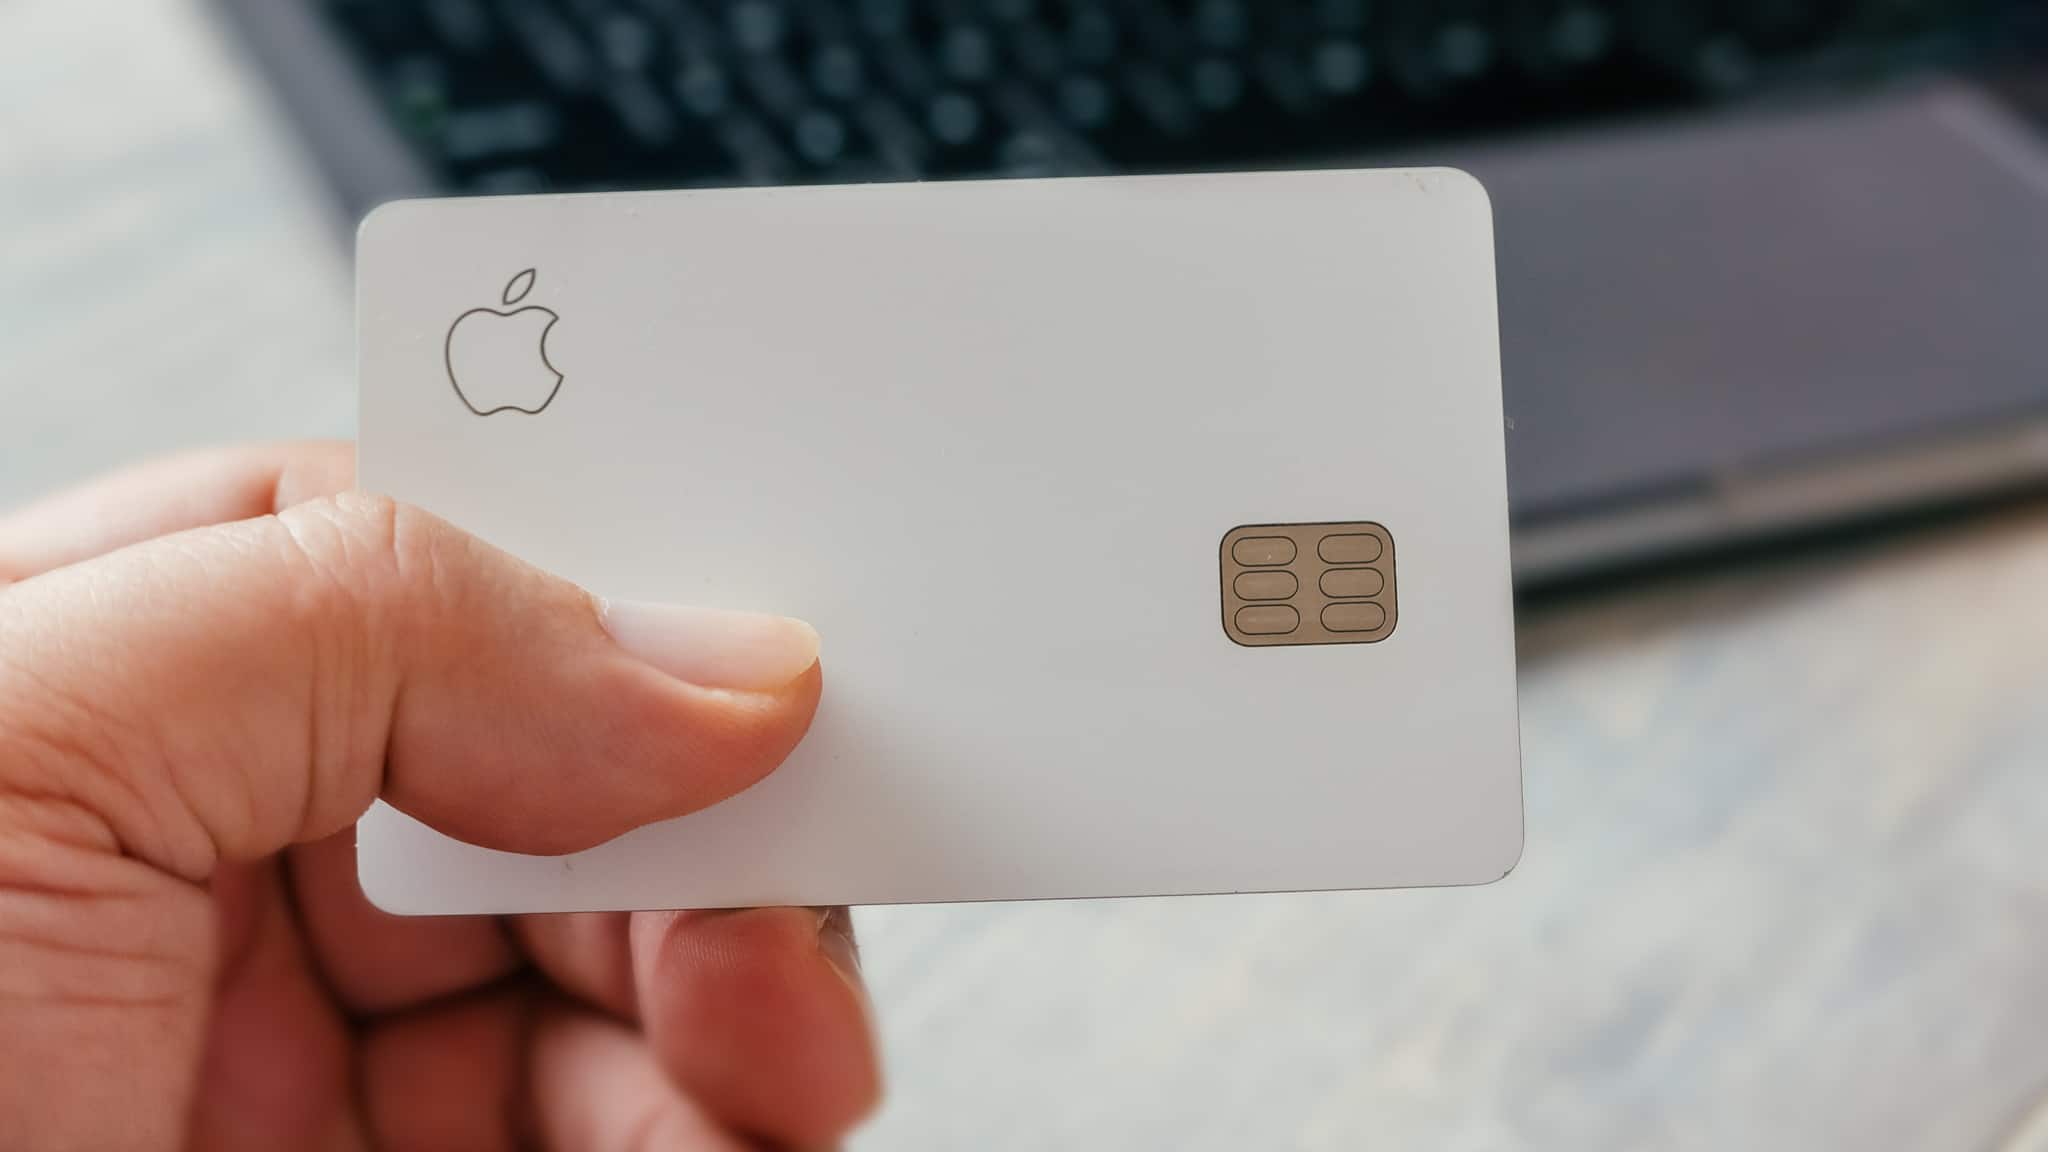 Apple Card Savings Rates Got a Boost, But Others Offer More